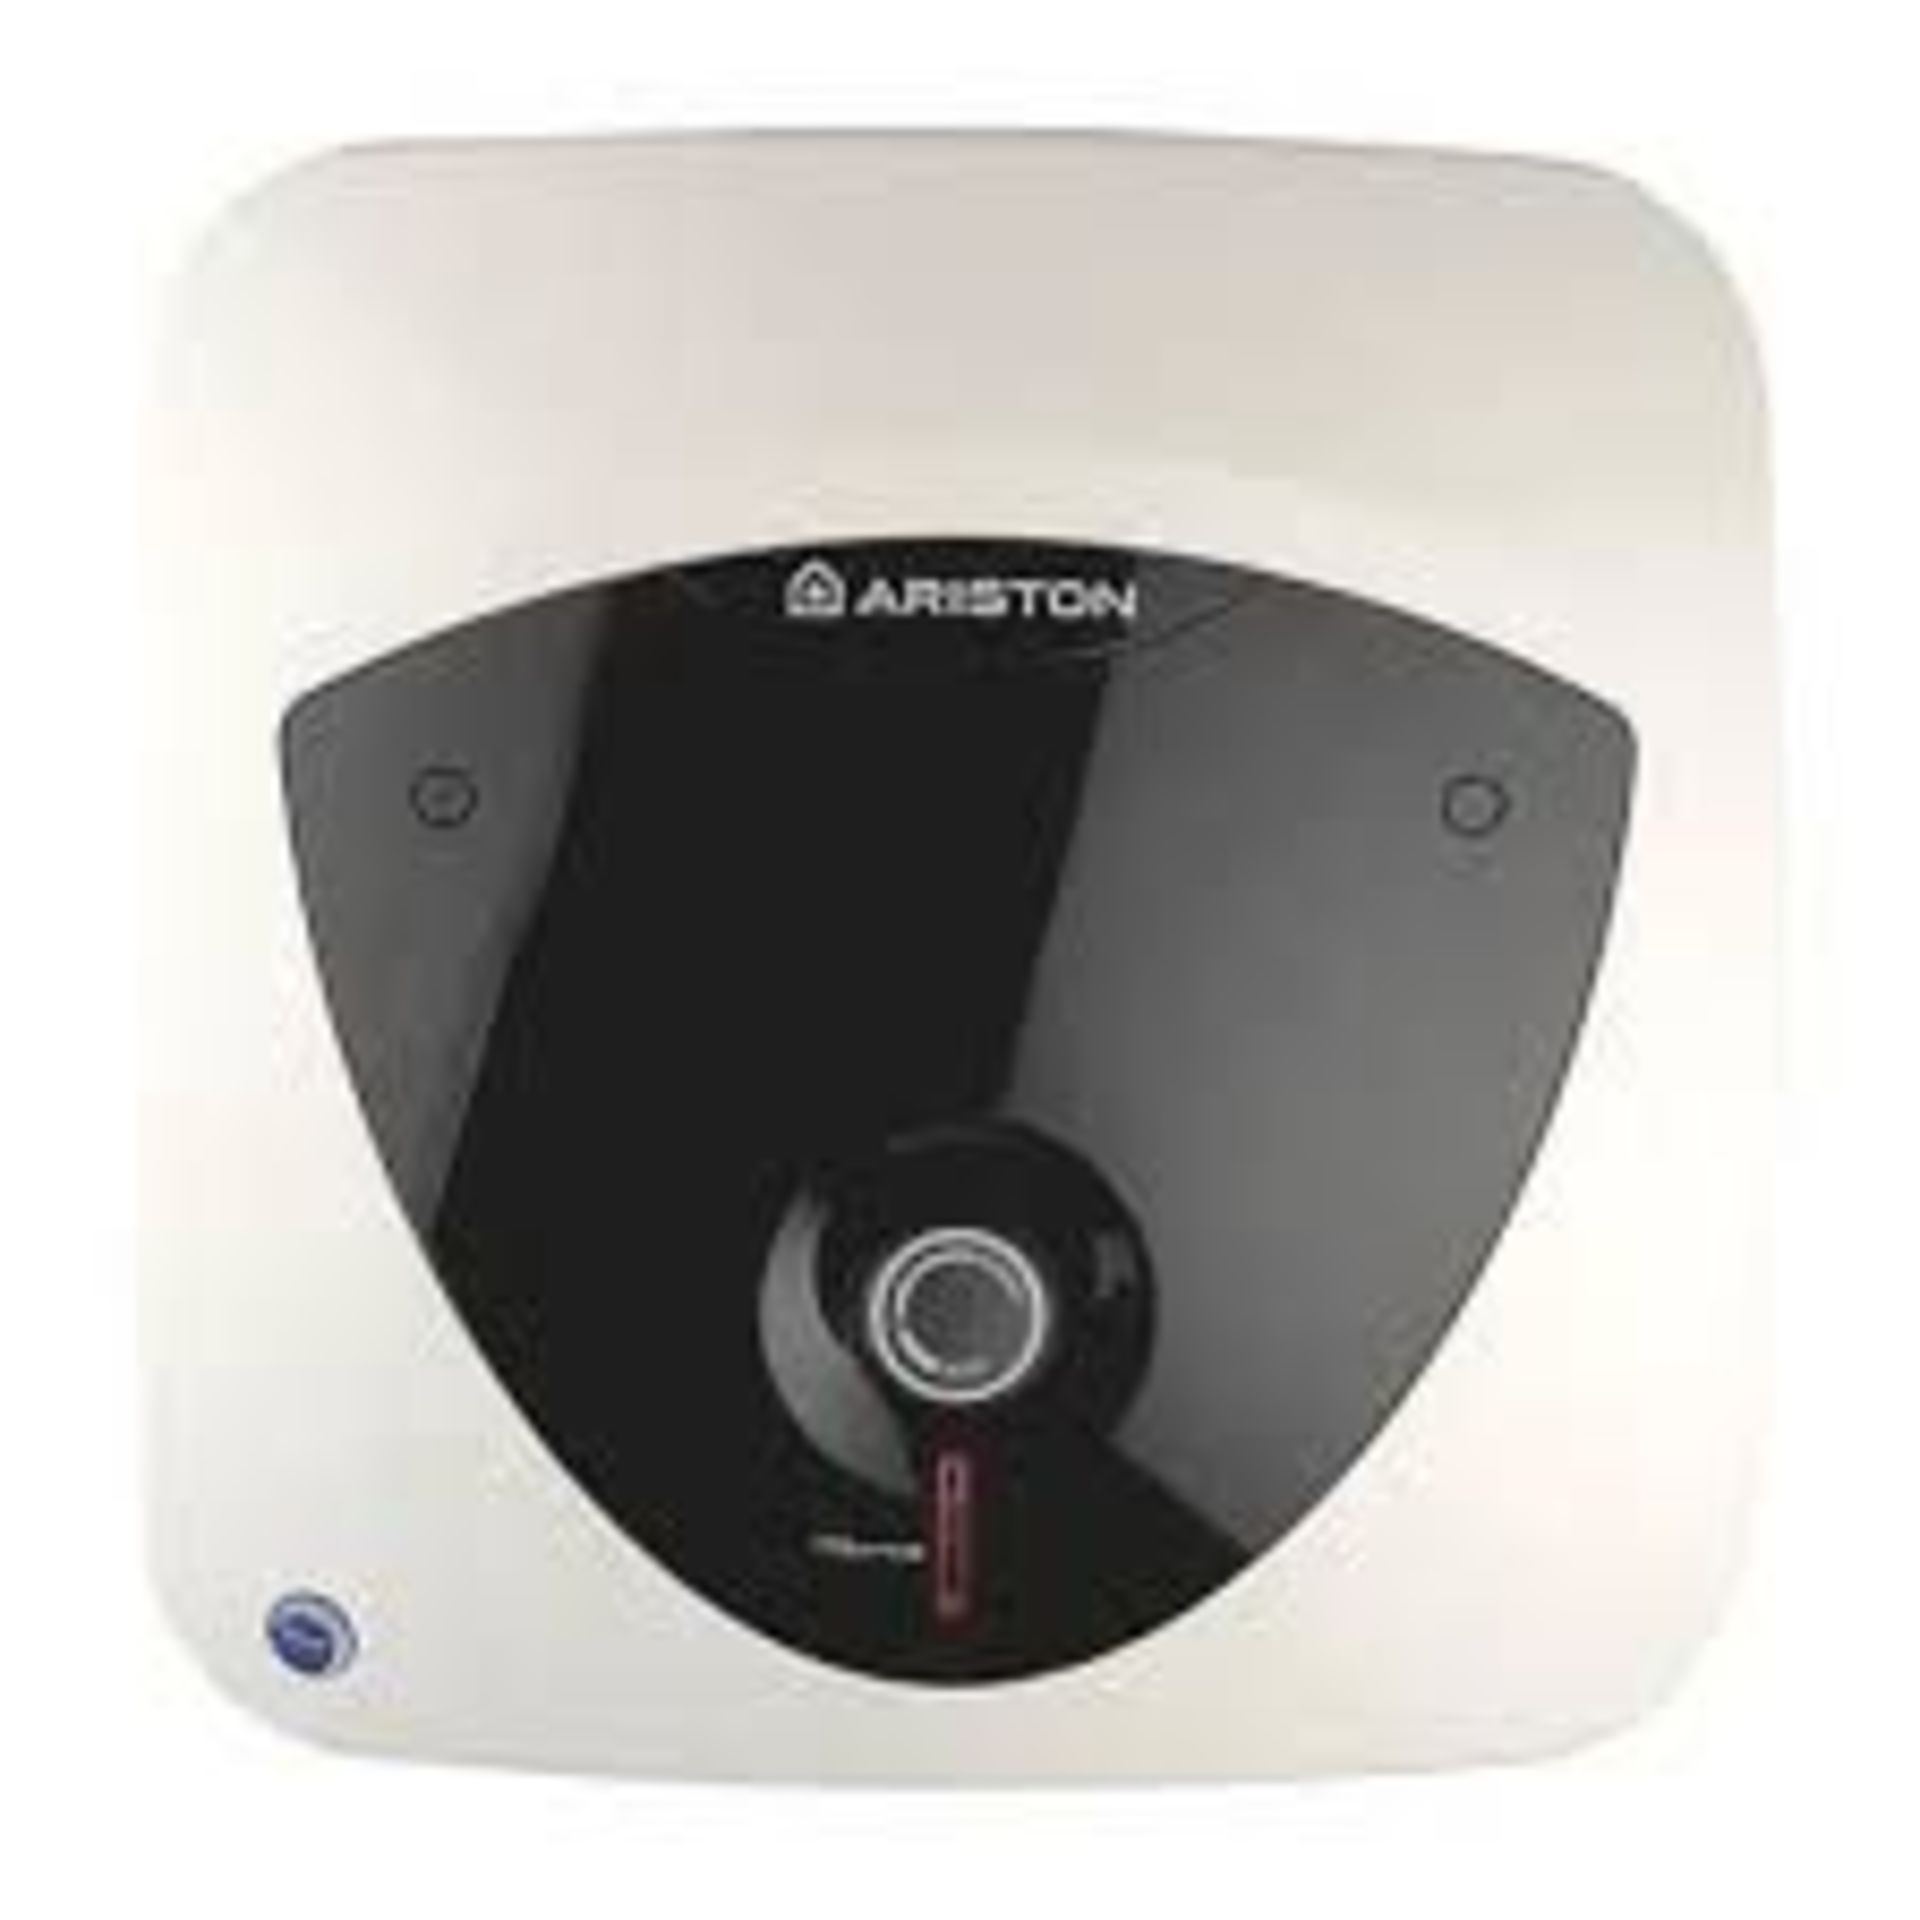 Ariston Andris Lux 10L 2KW Undersink Unvented Water Heater. - R14.13.